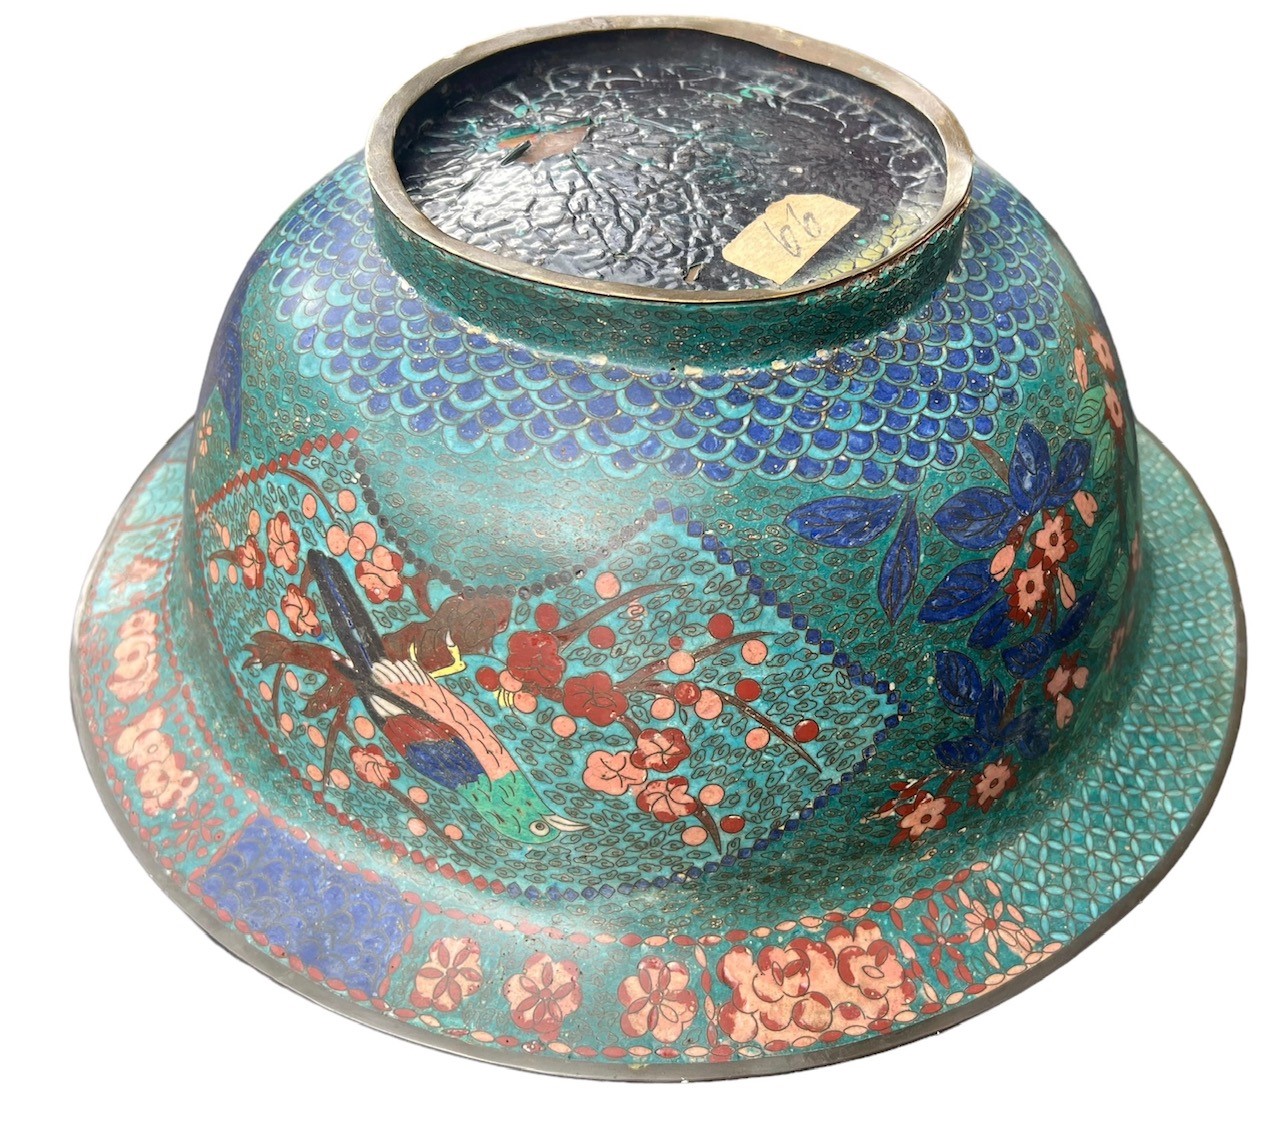 A LARGE CHINESE LATE MING DYNASTY 17TH CENTURY CLOISONNÉ BOWL Of waisted circular form with a flared - Image 6 of 8